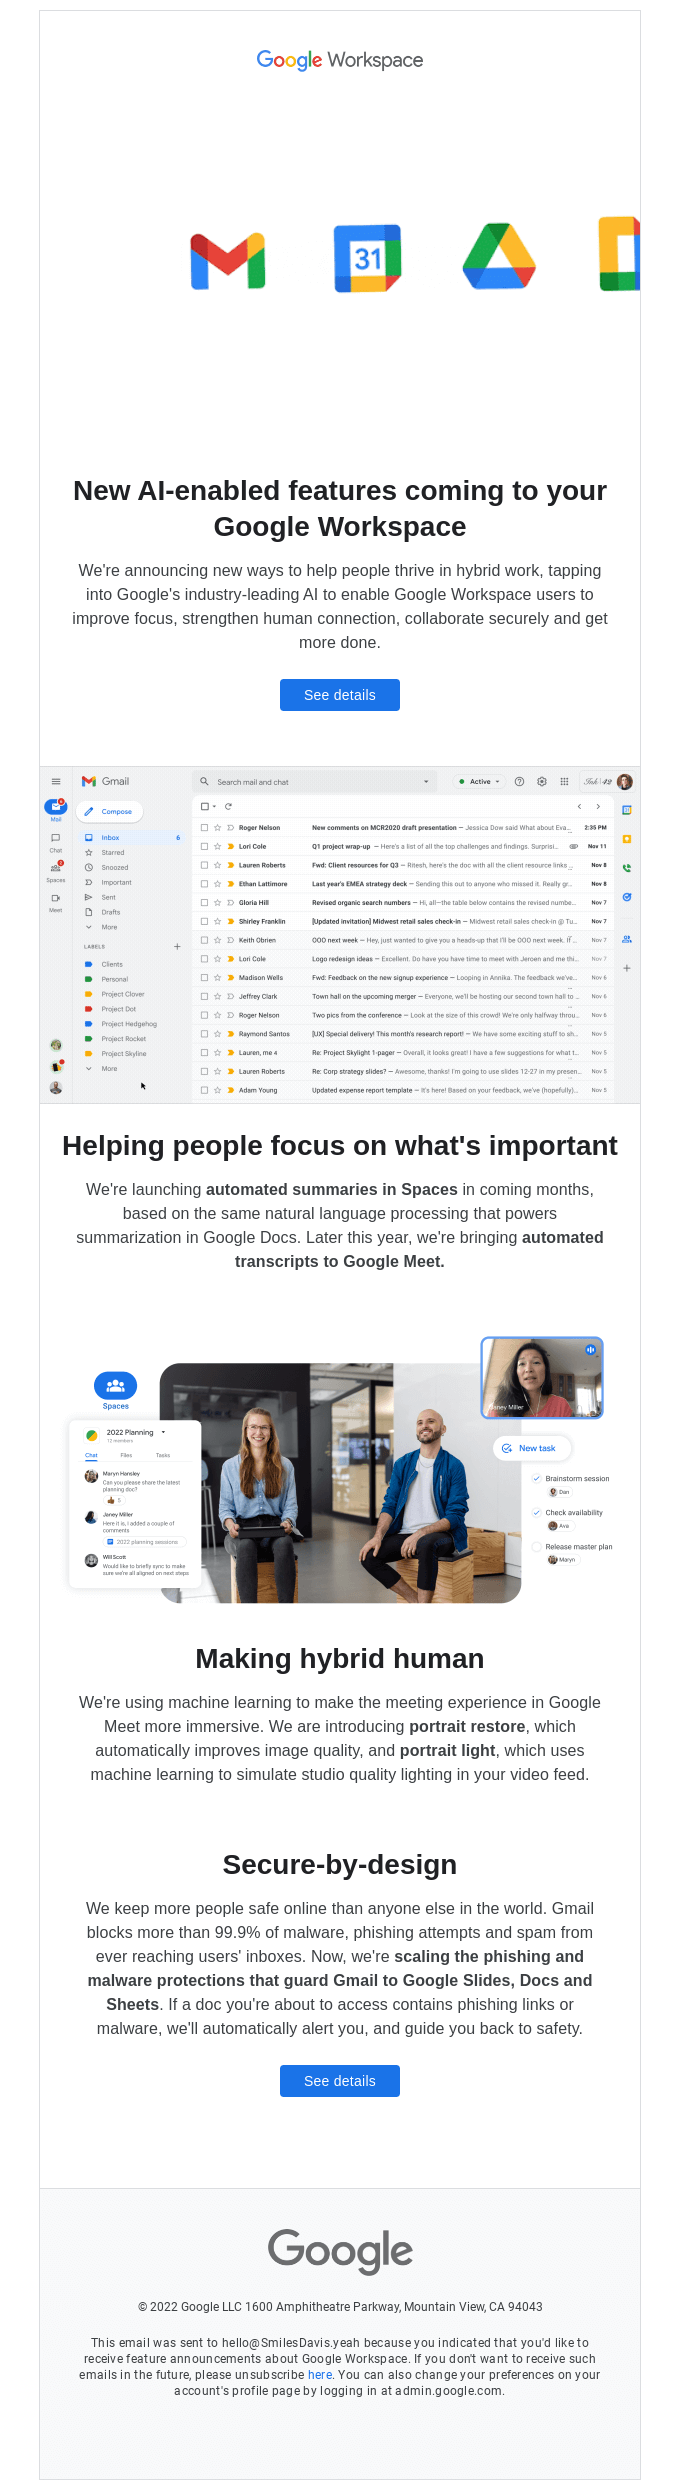 I/O 2022 announces new Google Workspace features - Google Email Newsletter